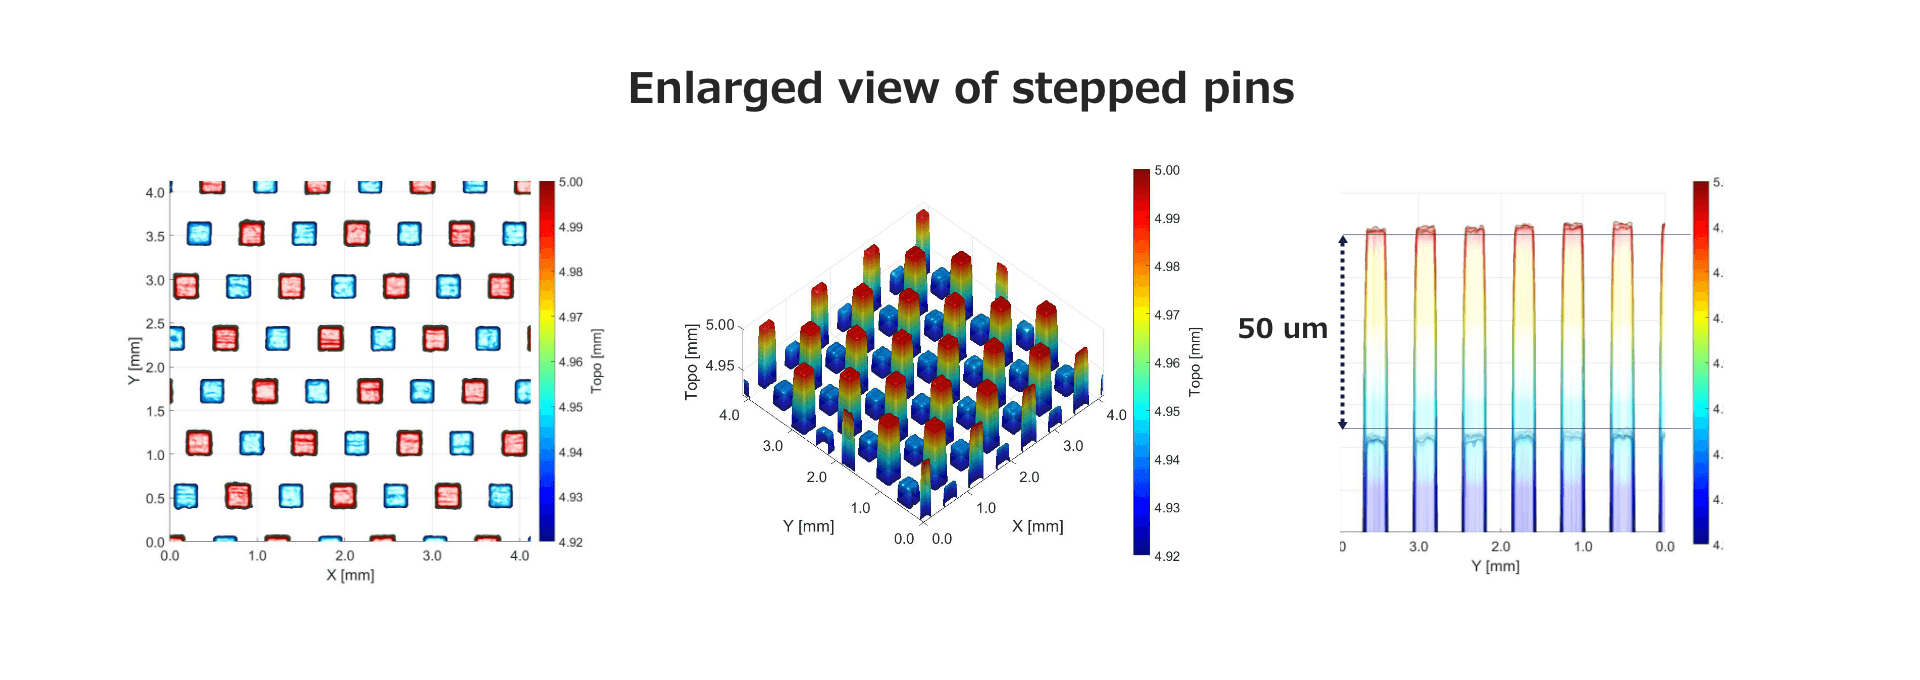 Enlarged view of stepped pins